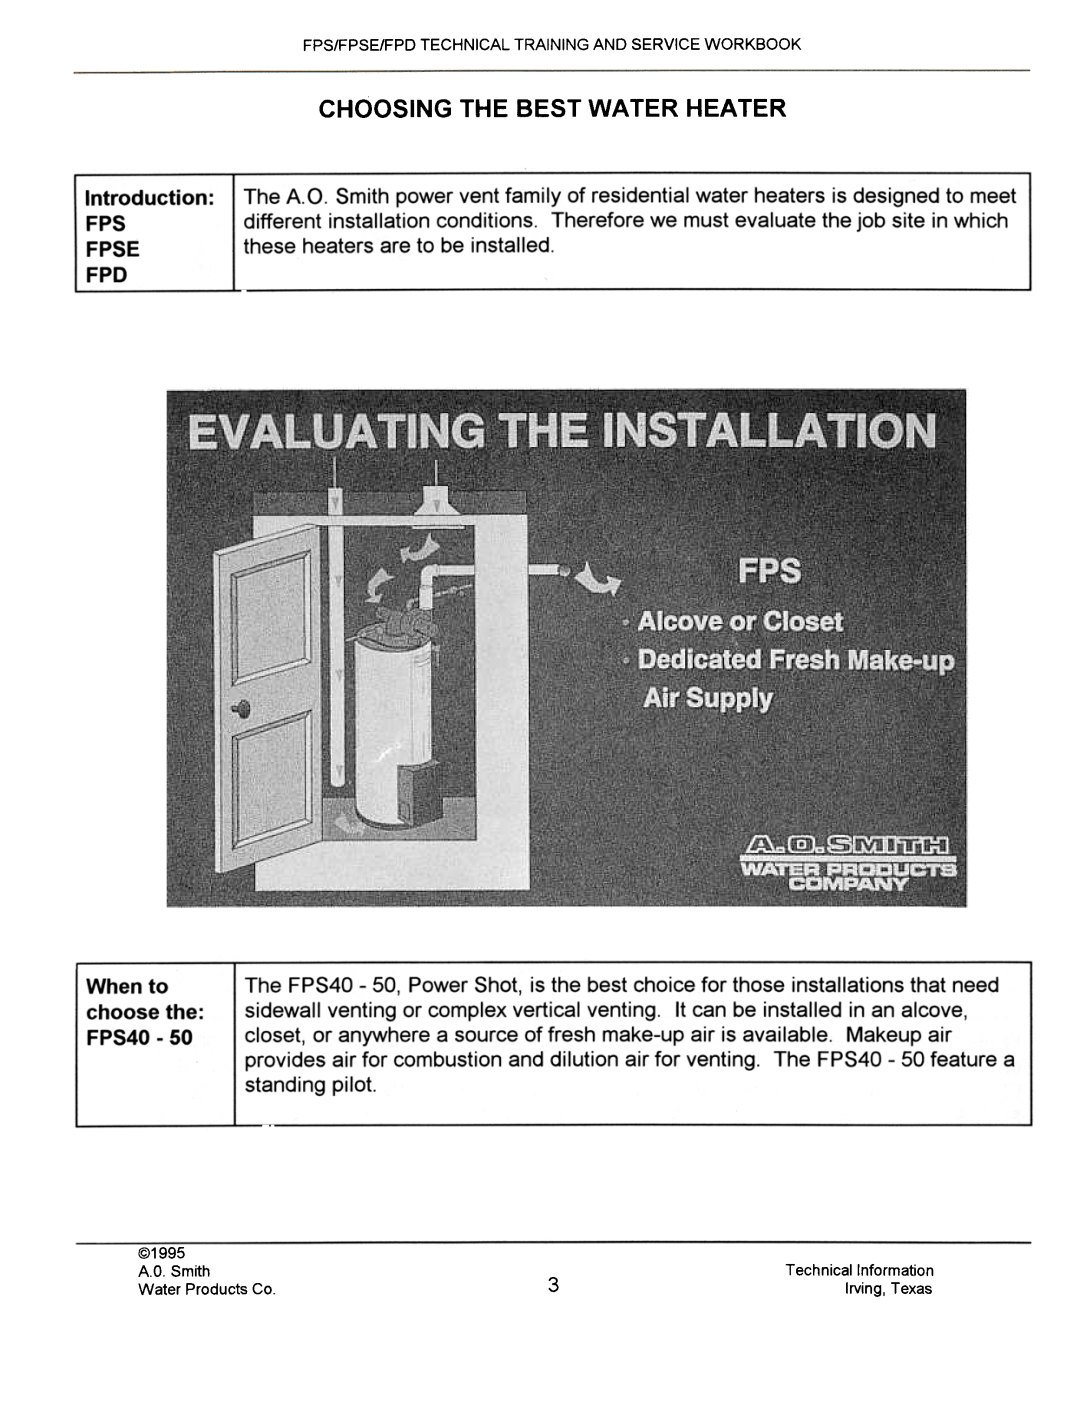 A.O. Smith FPSE50, fps50, FPS40, FPS 75 manual @1995, A.D.Smith, Technical Information, Water Products Co, Irving, Texas 